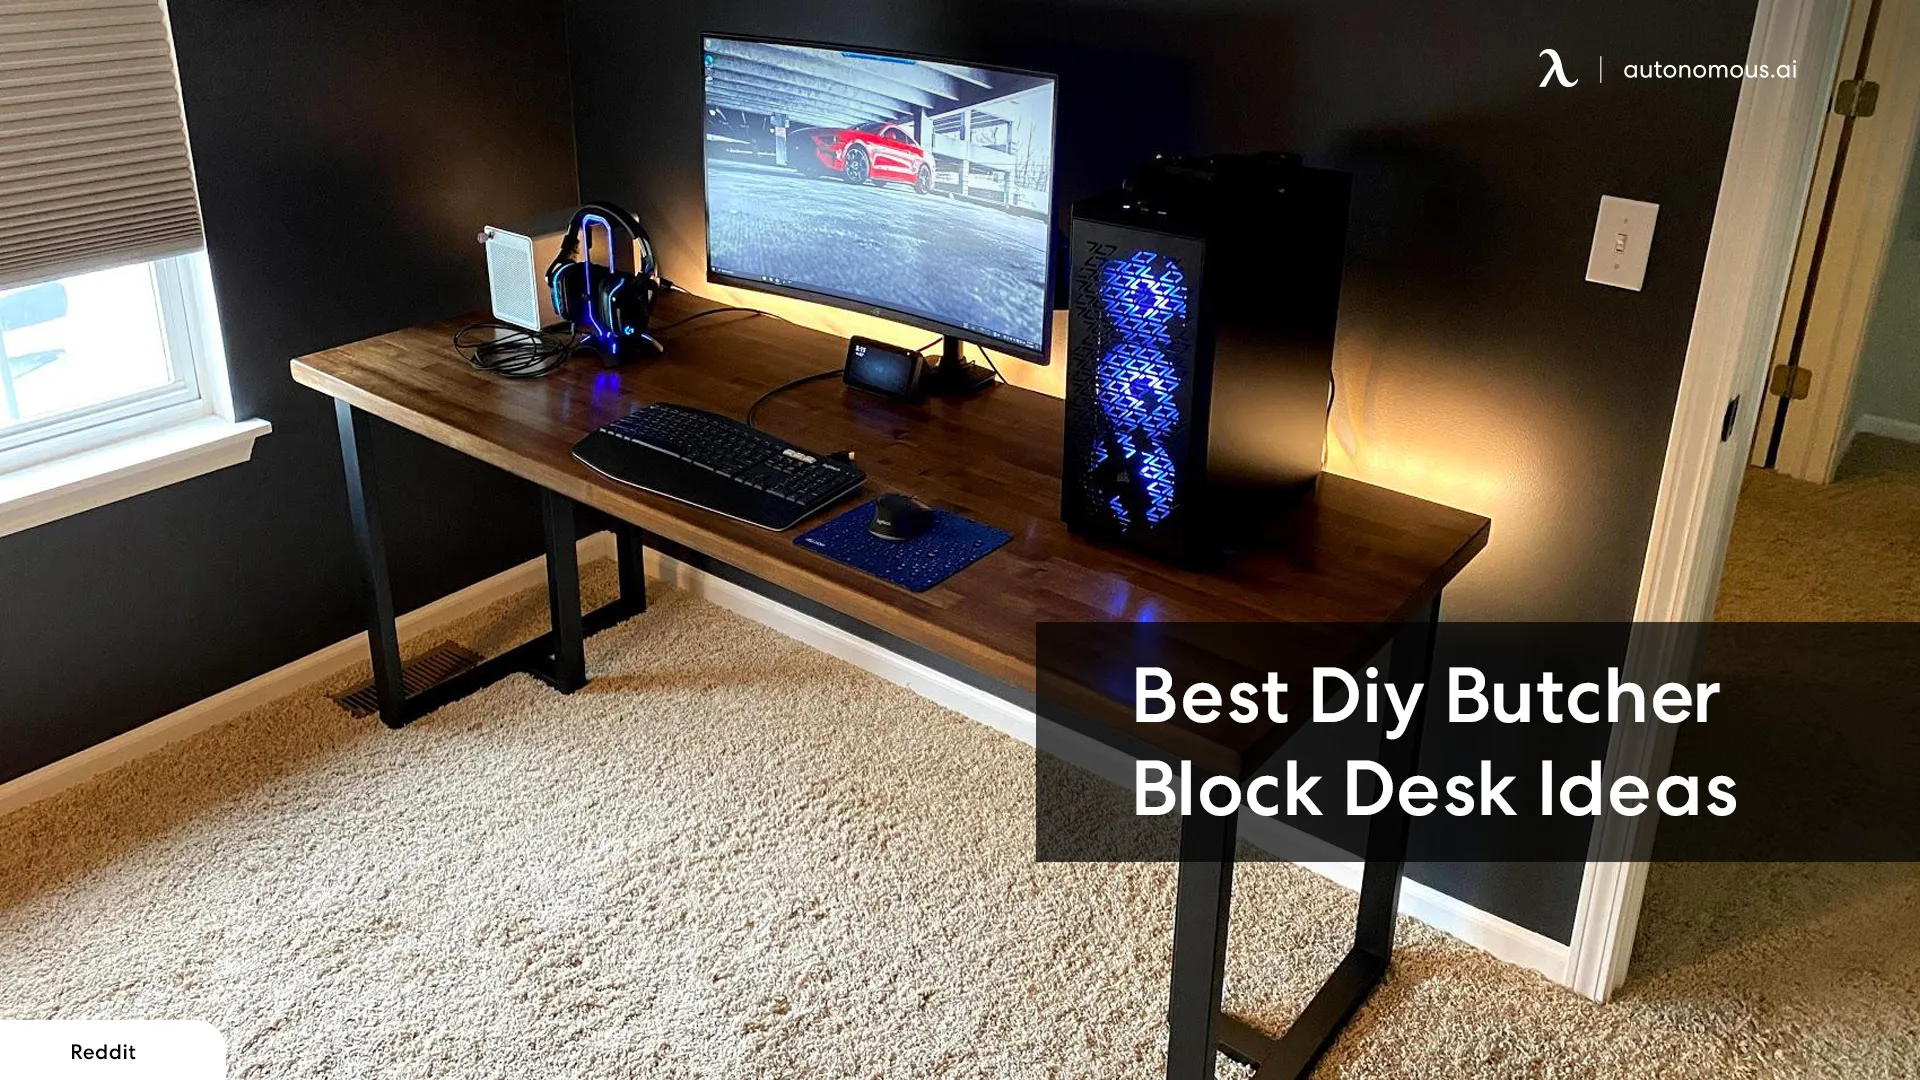 Get Crafty with These DIY Butcher Block Desk Ideas